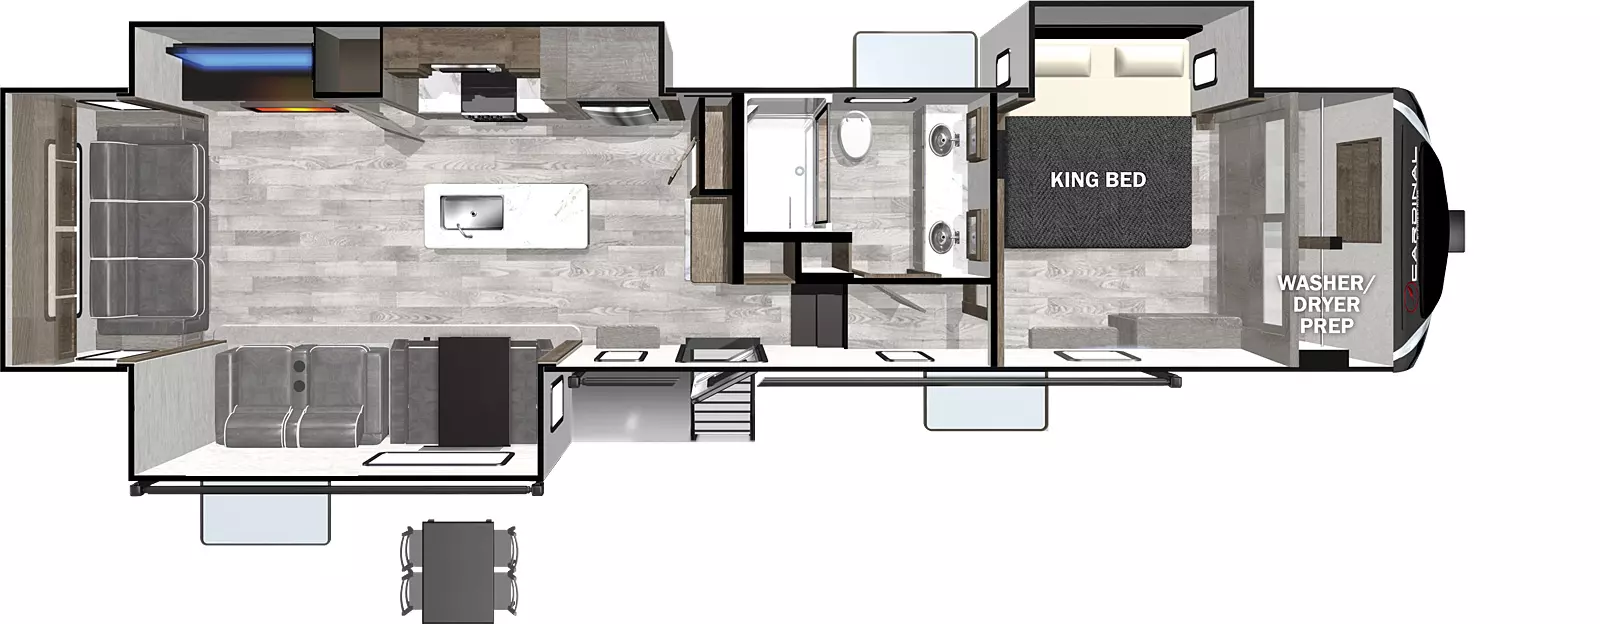 The 367DVLE has three slideouts and one entry. Interior layout front to back: bedroom with king bed slideout and washer/dryer prep; off-door side aisle bathroom; off-door side slideout with kitchen and entertainment center; kitchen island with sink; door side slideout with dinette and seating; rear sofa. Optional free-standing dinette.